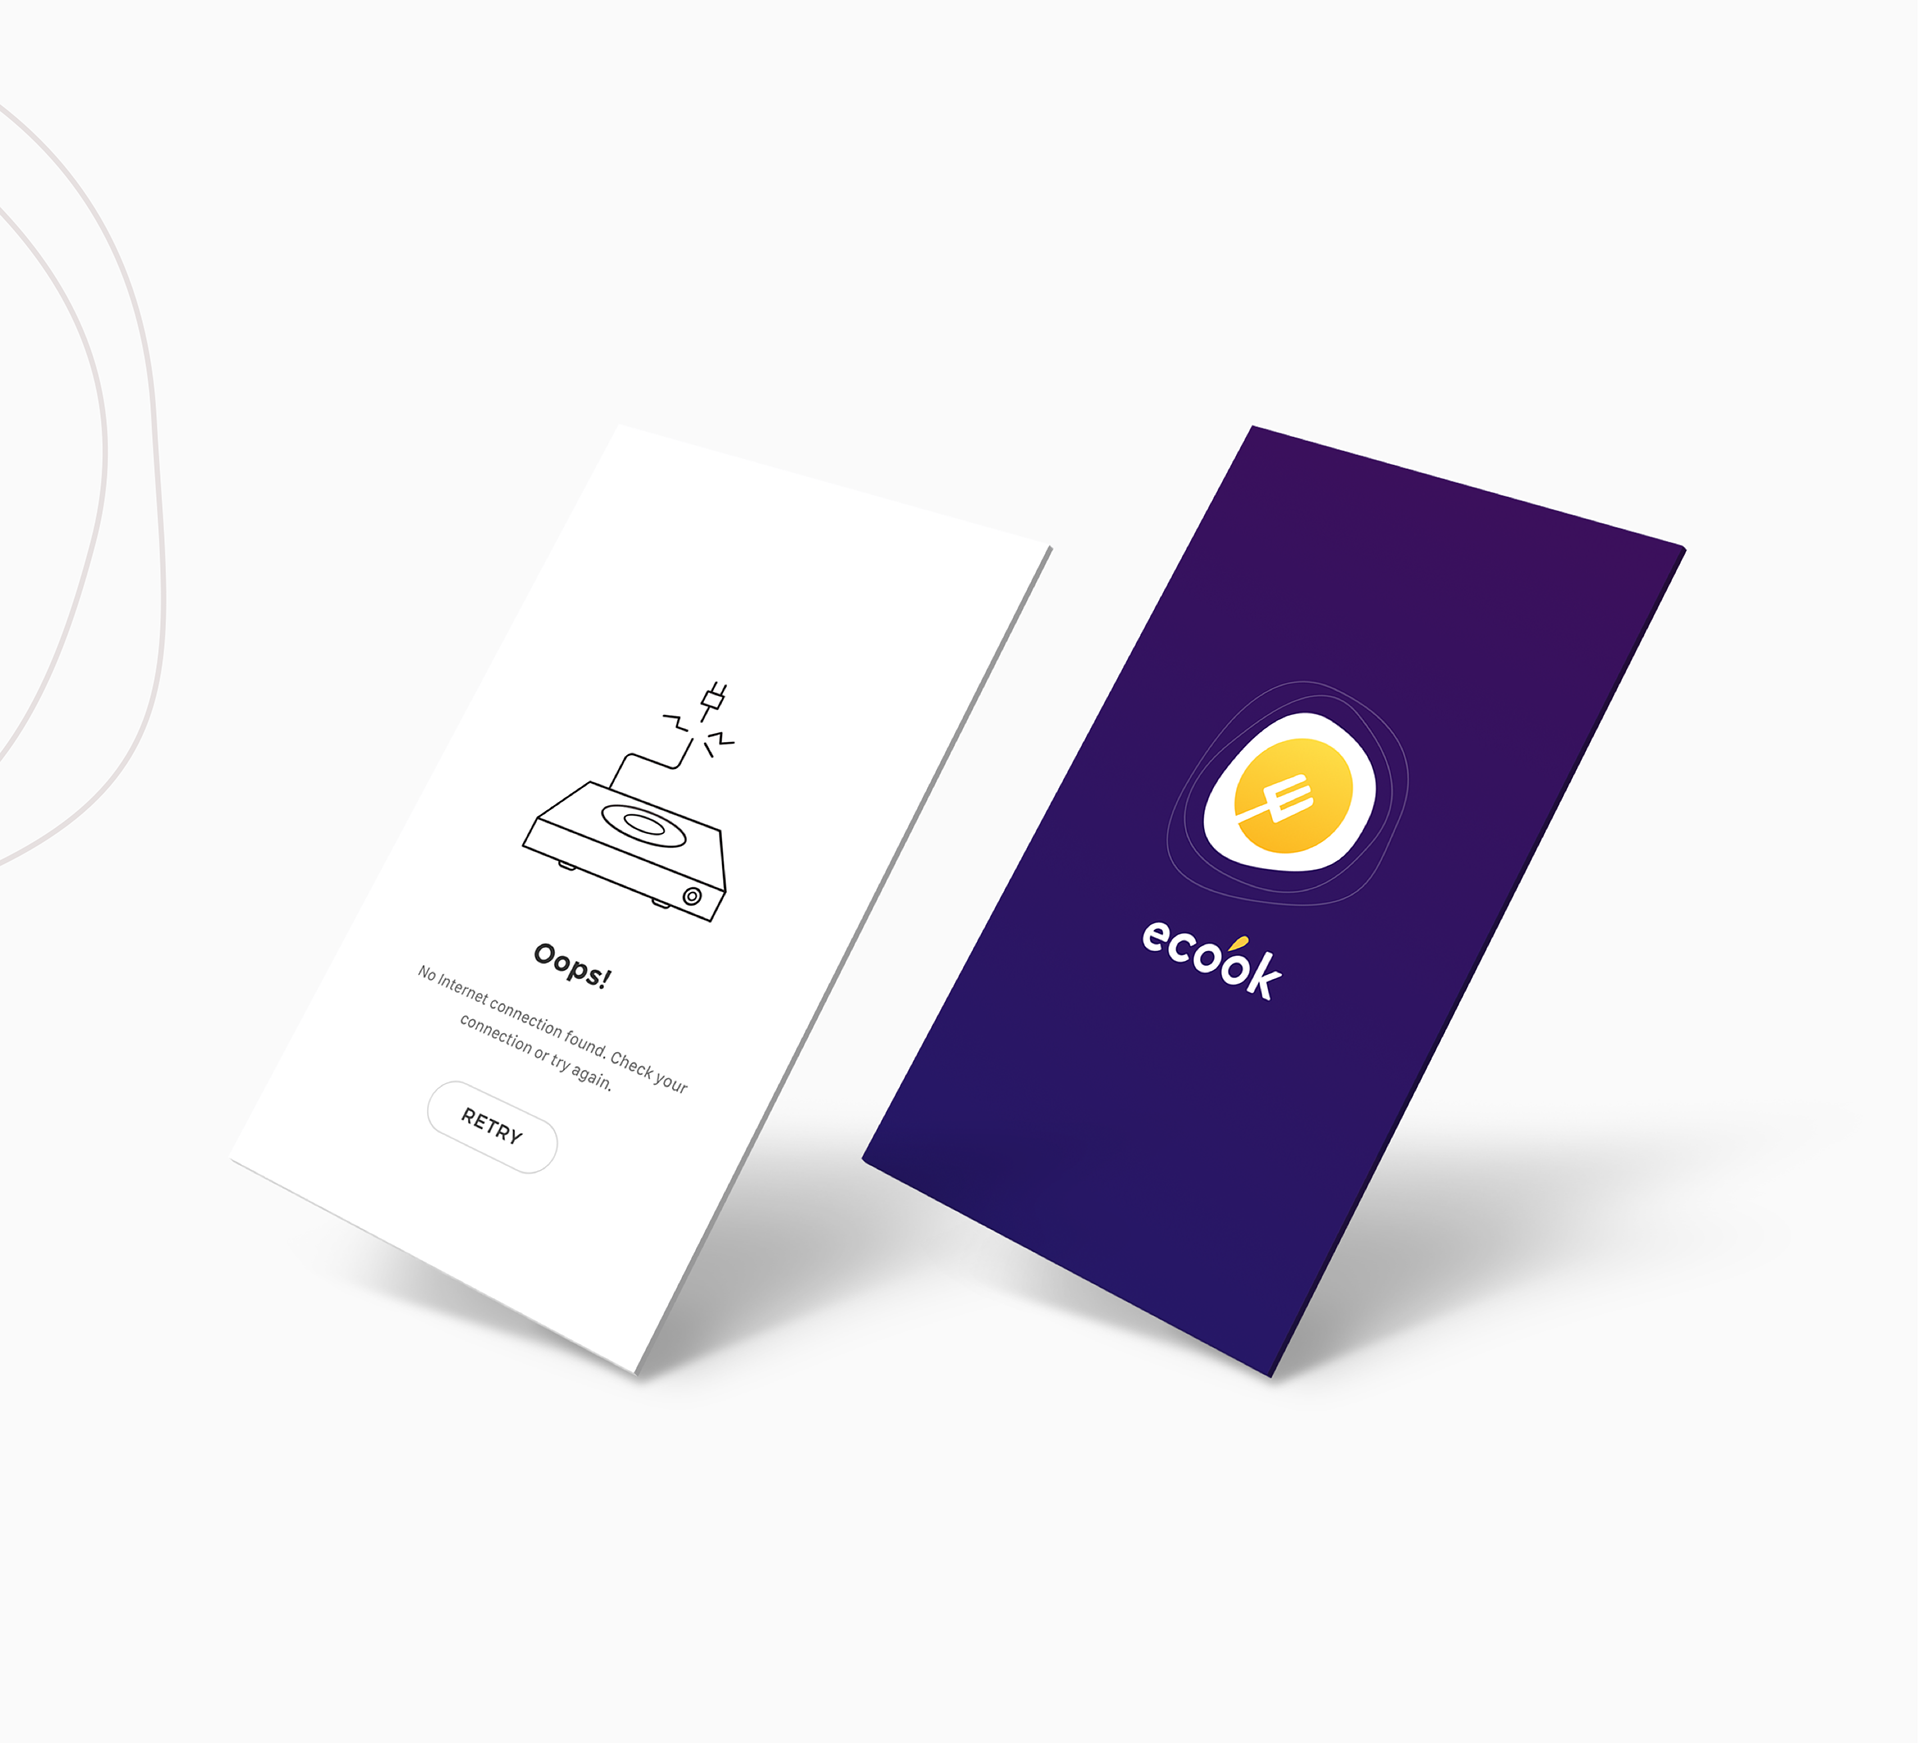 Interaction Design & UI/UX of the Ecook App Concept